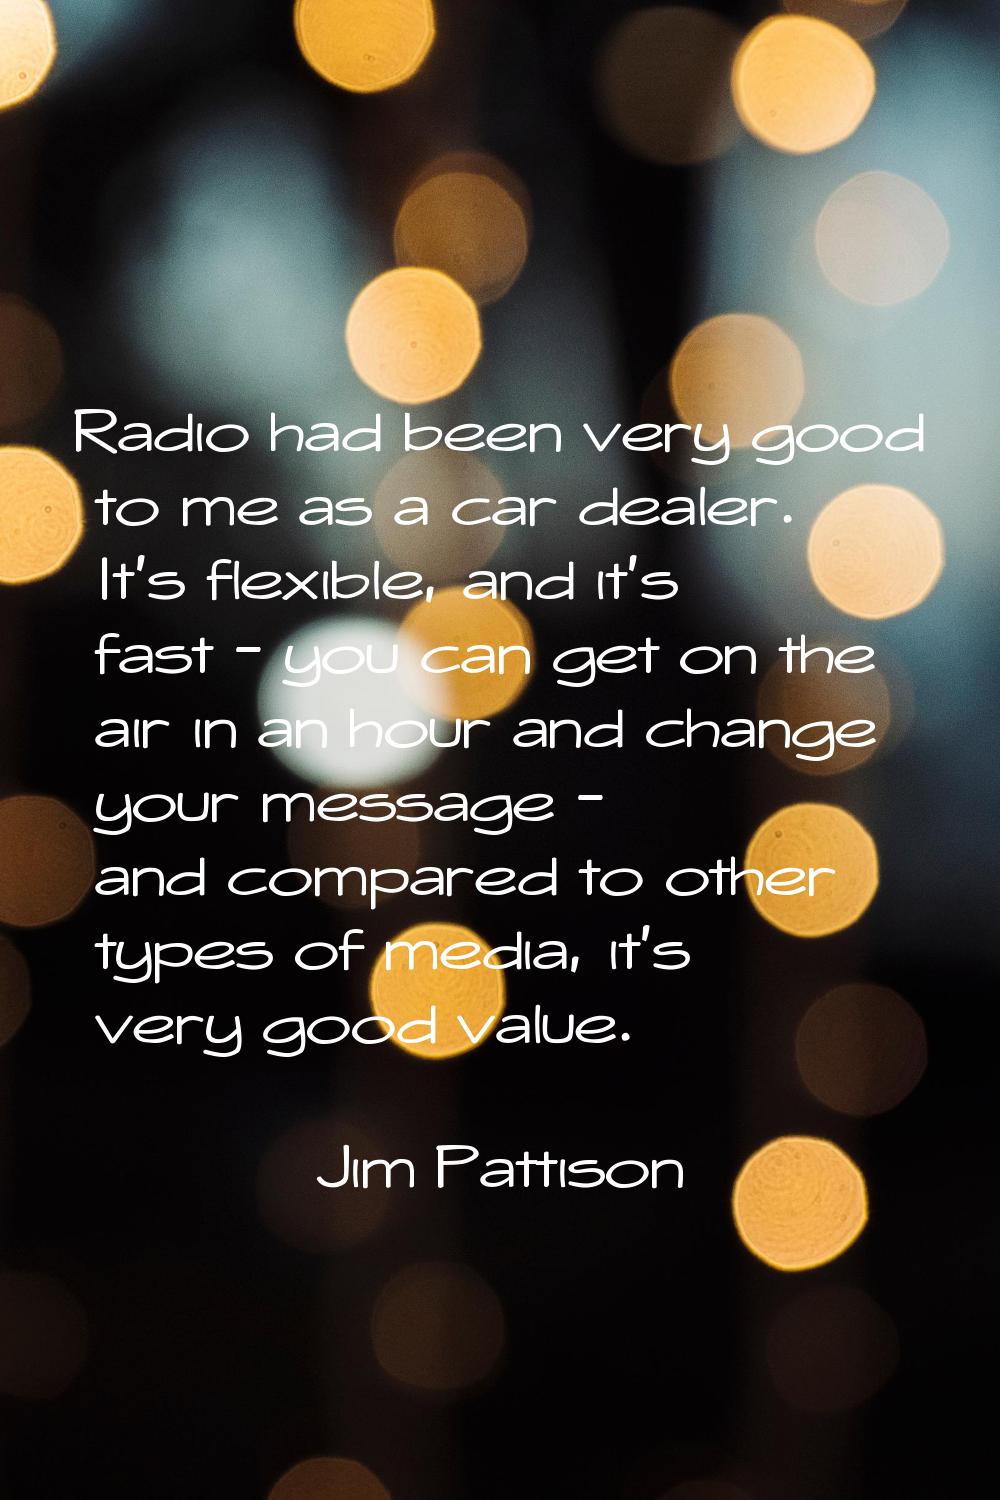 Radio had been very good to me as a car dealer. It's flexible, and it's fast - you can get on the a